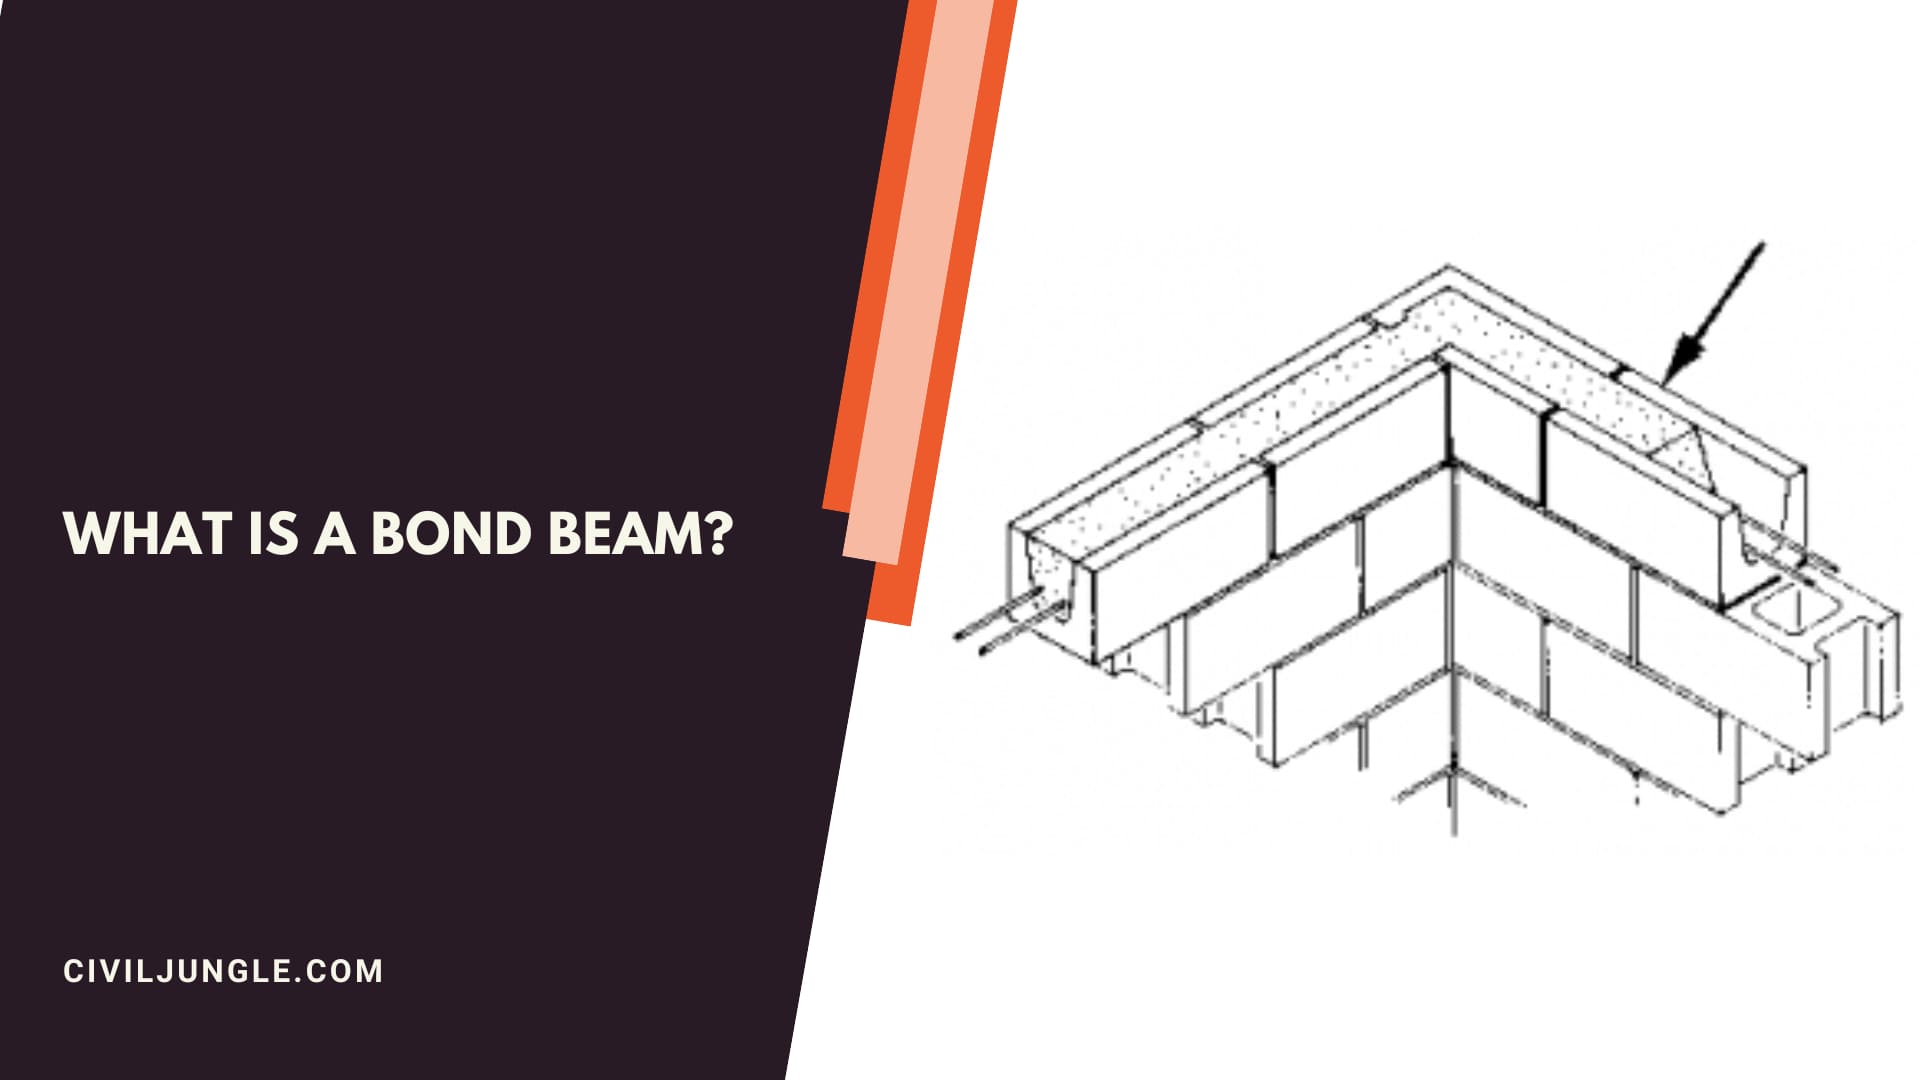 What Is a Bond Beam?